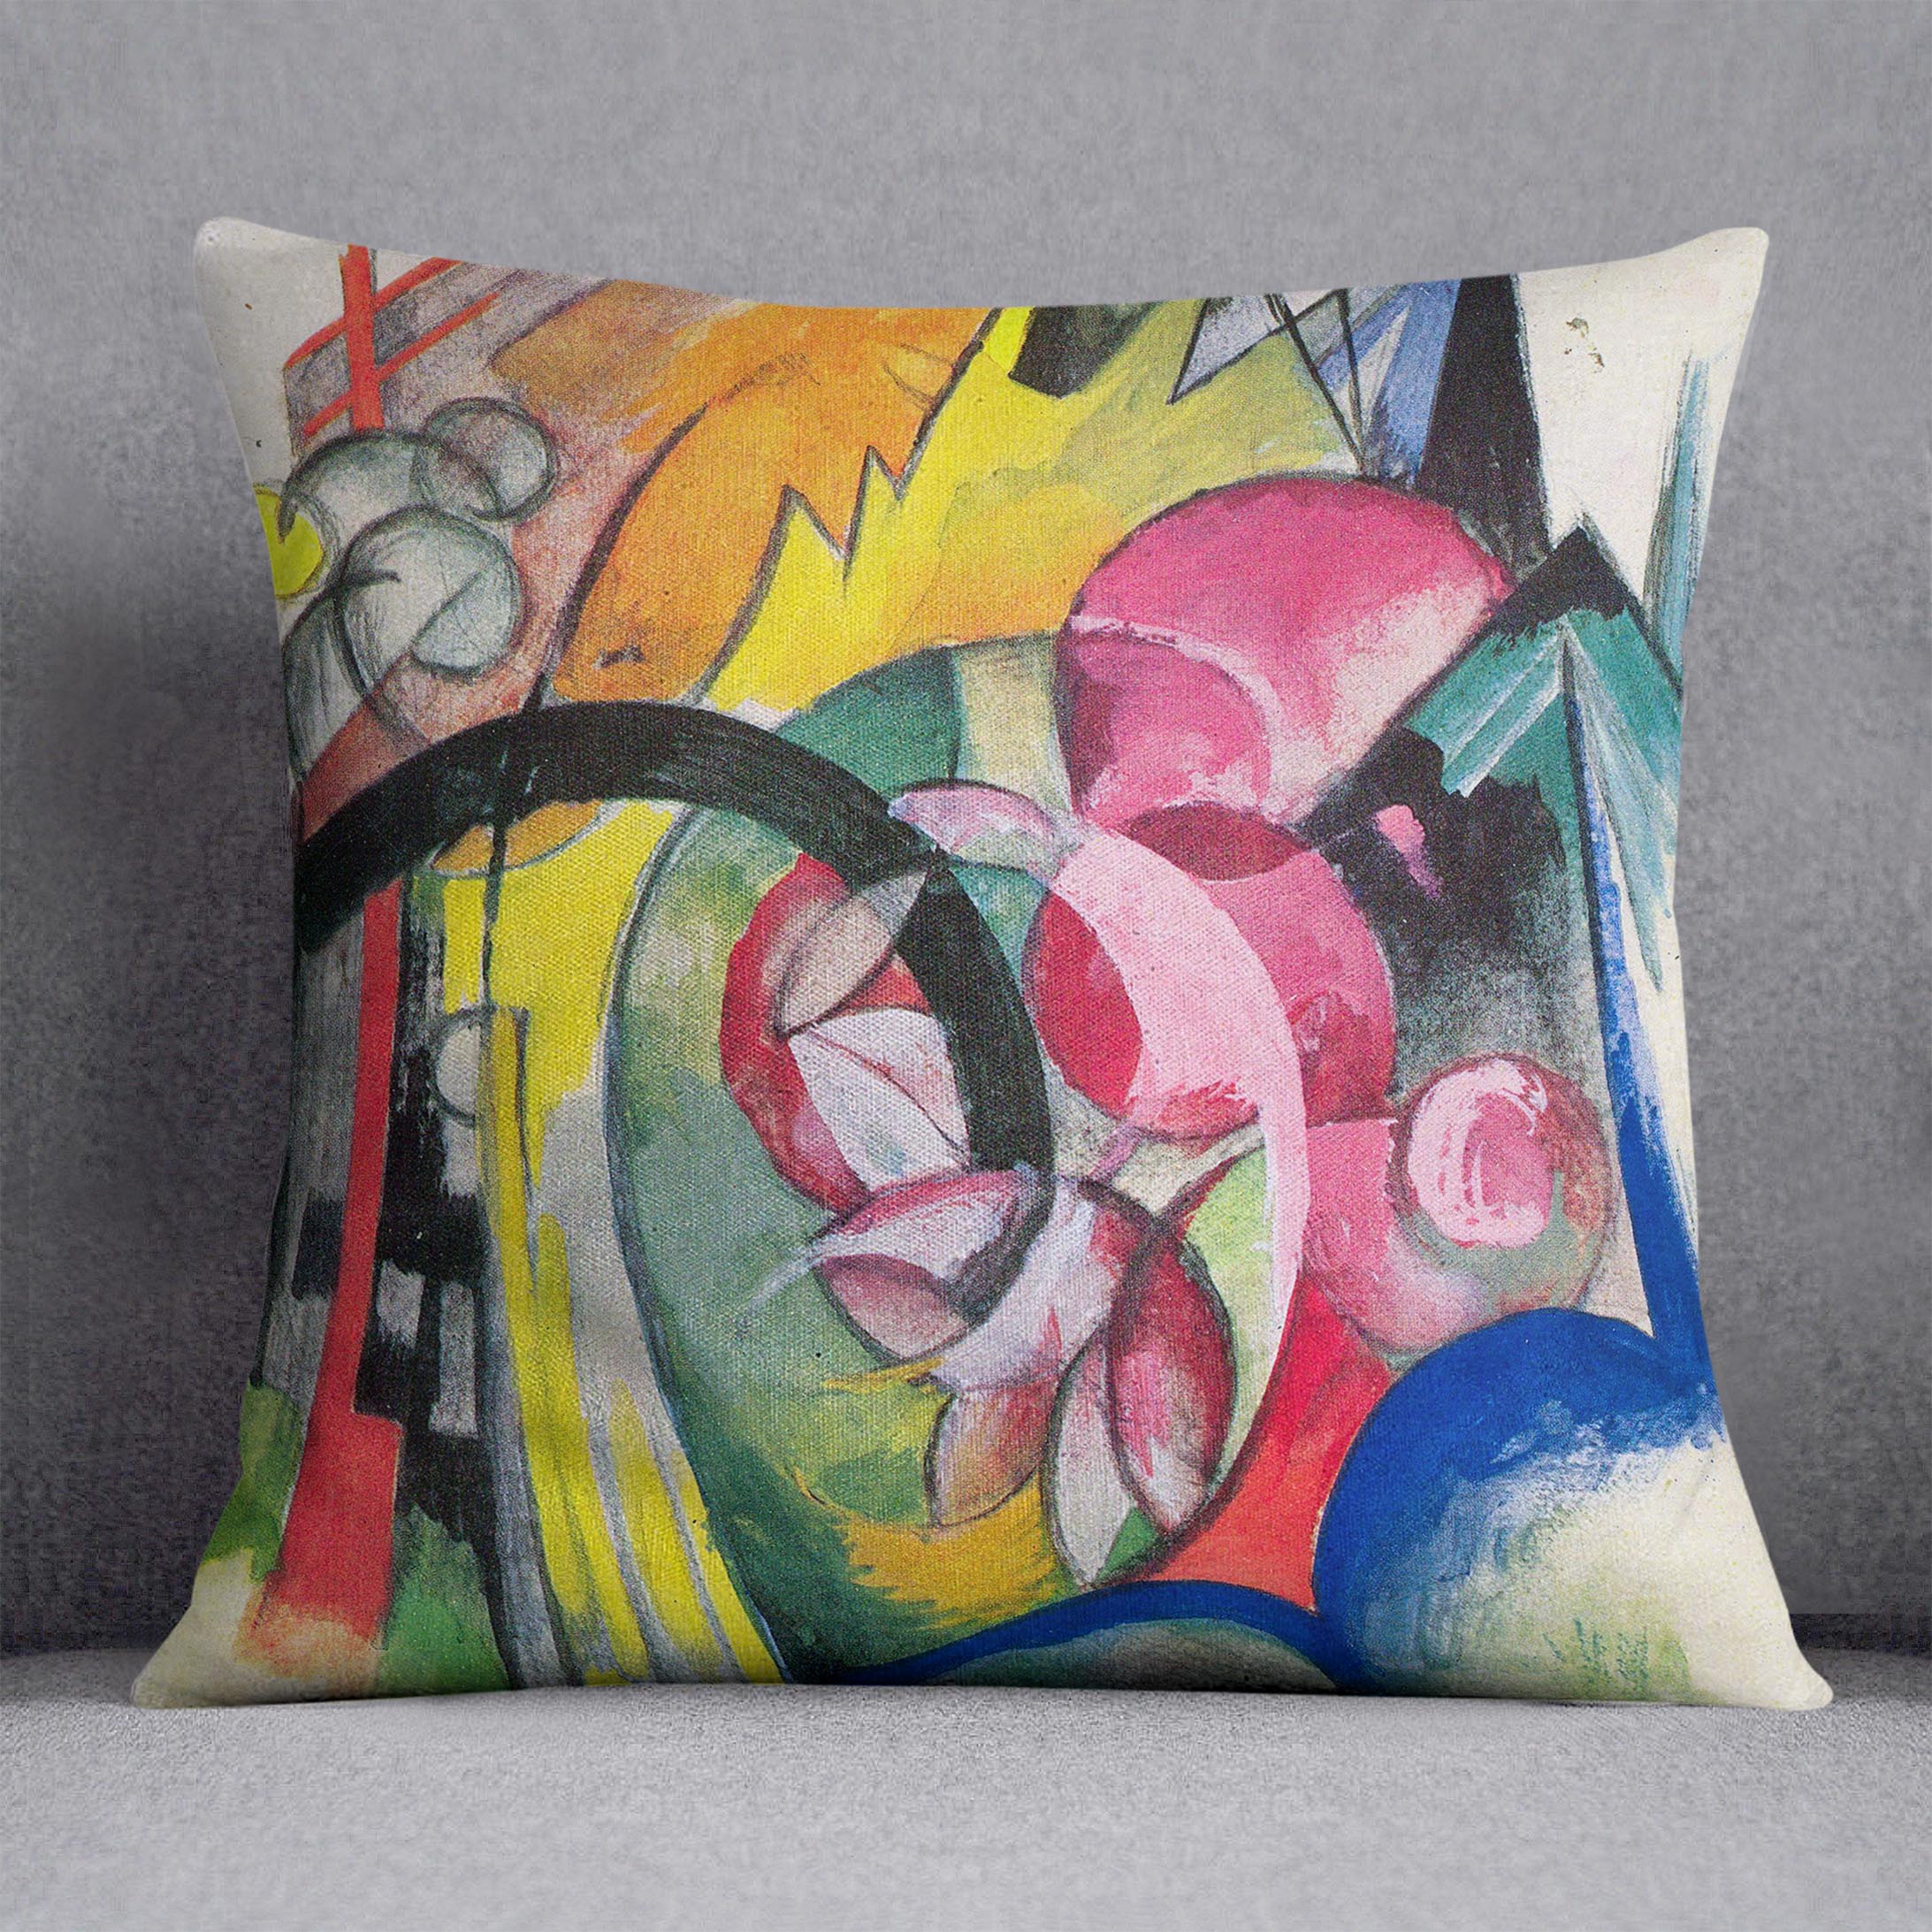 Small composition II by Franz Marc Cushion